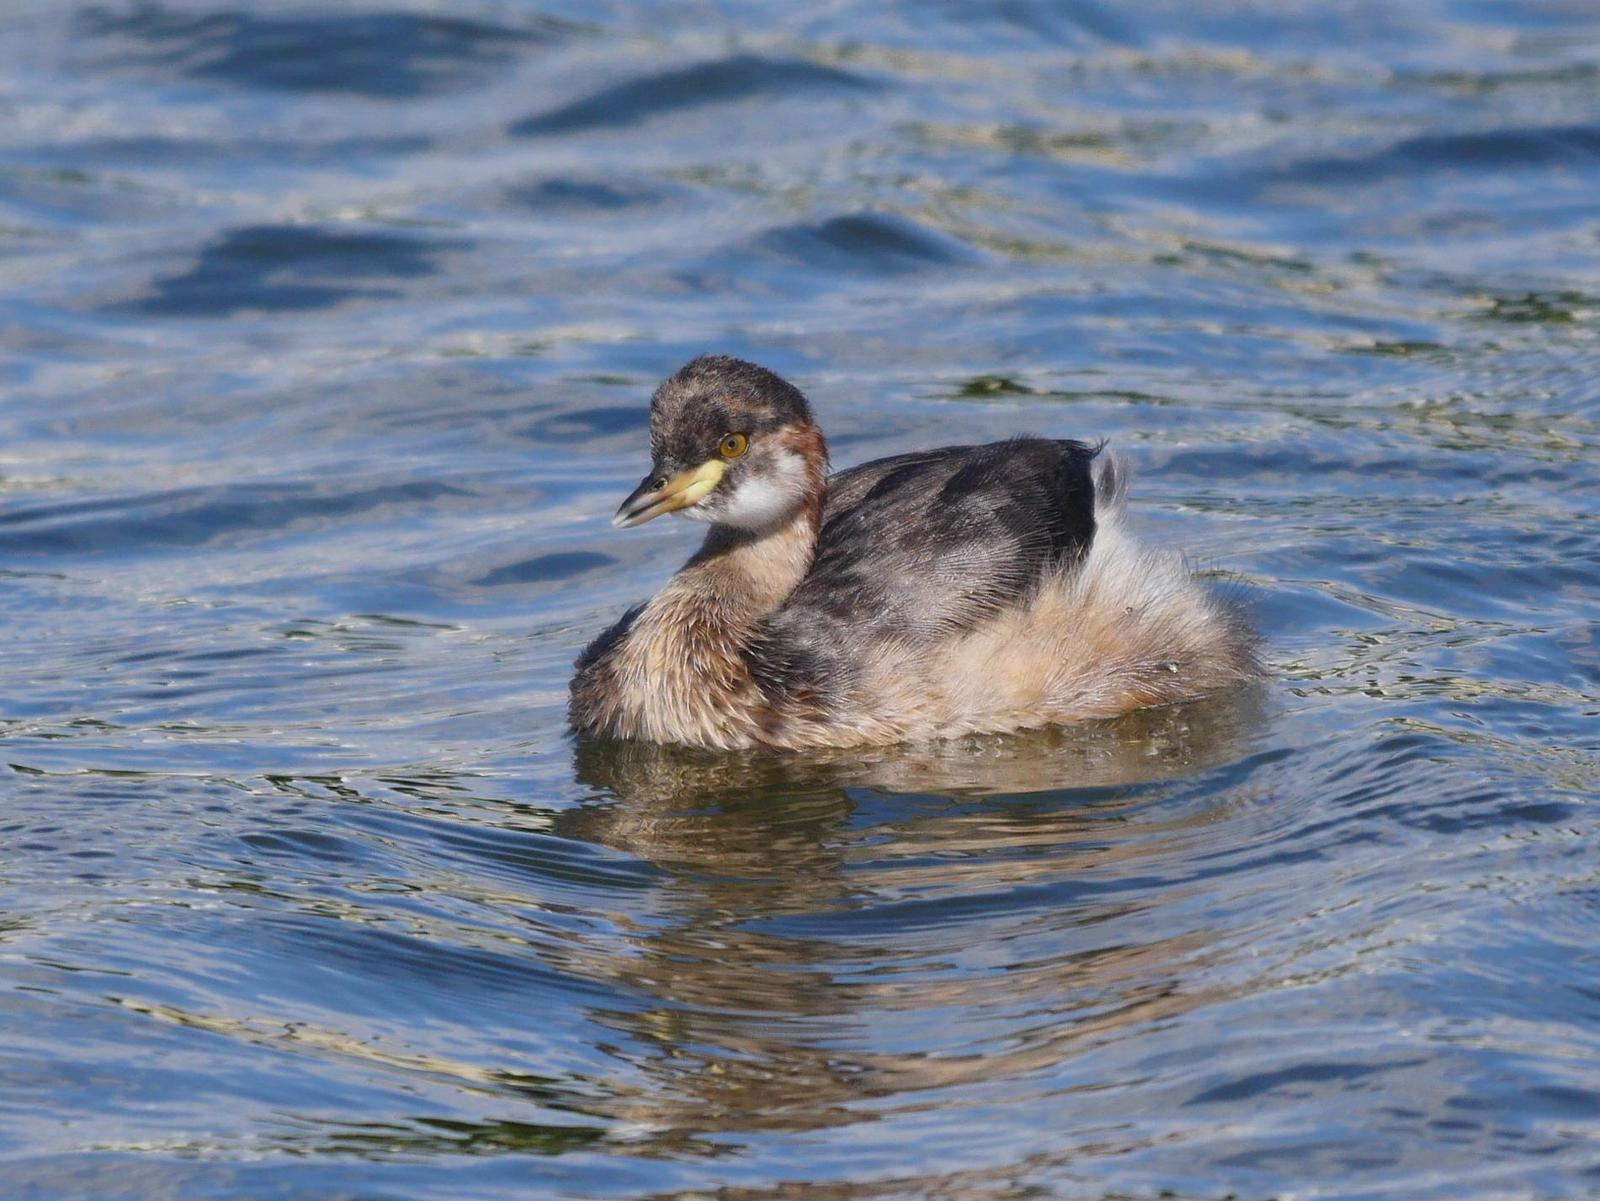 Australasian Grebe Photo by Peter Lowe